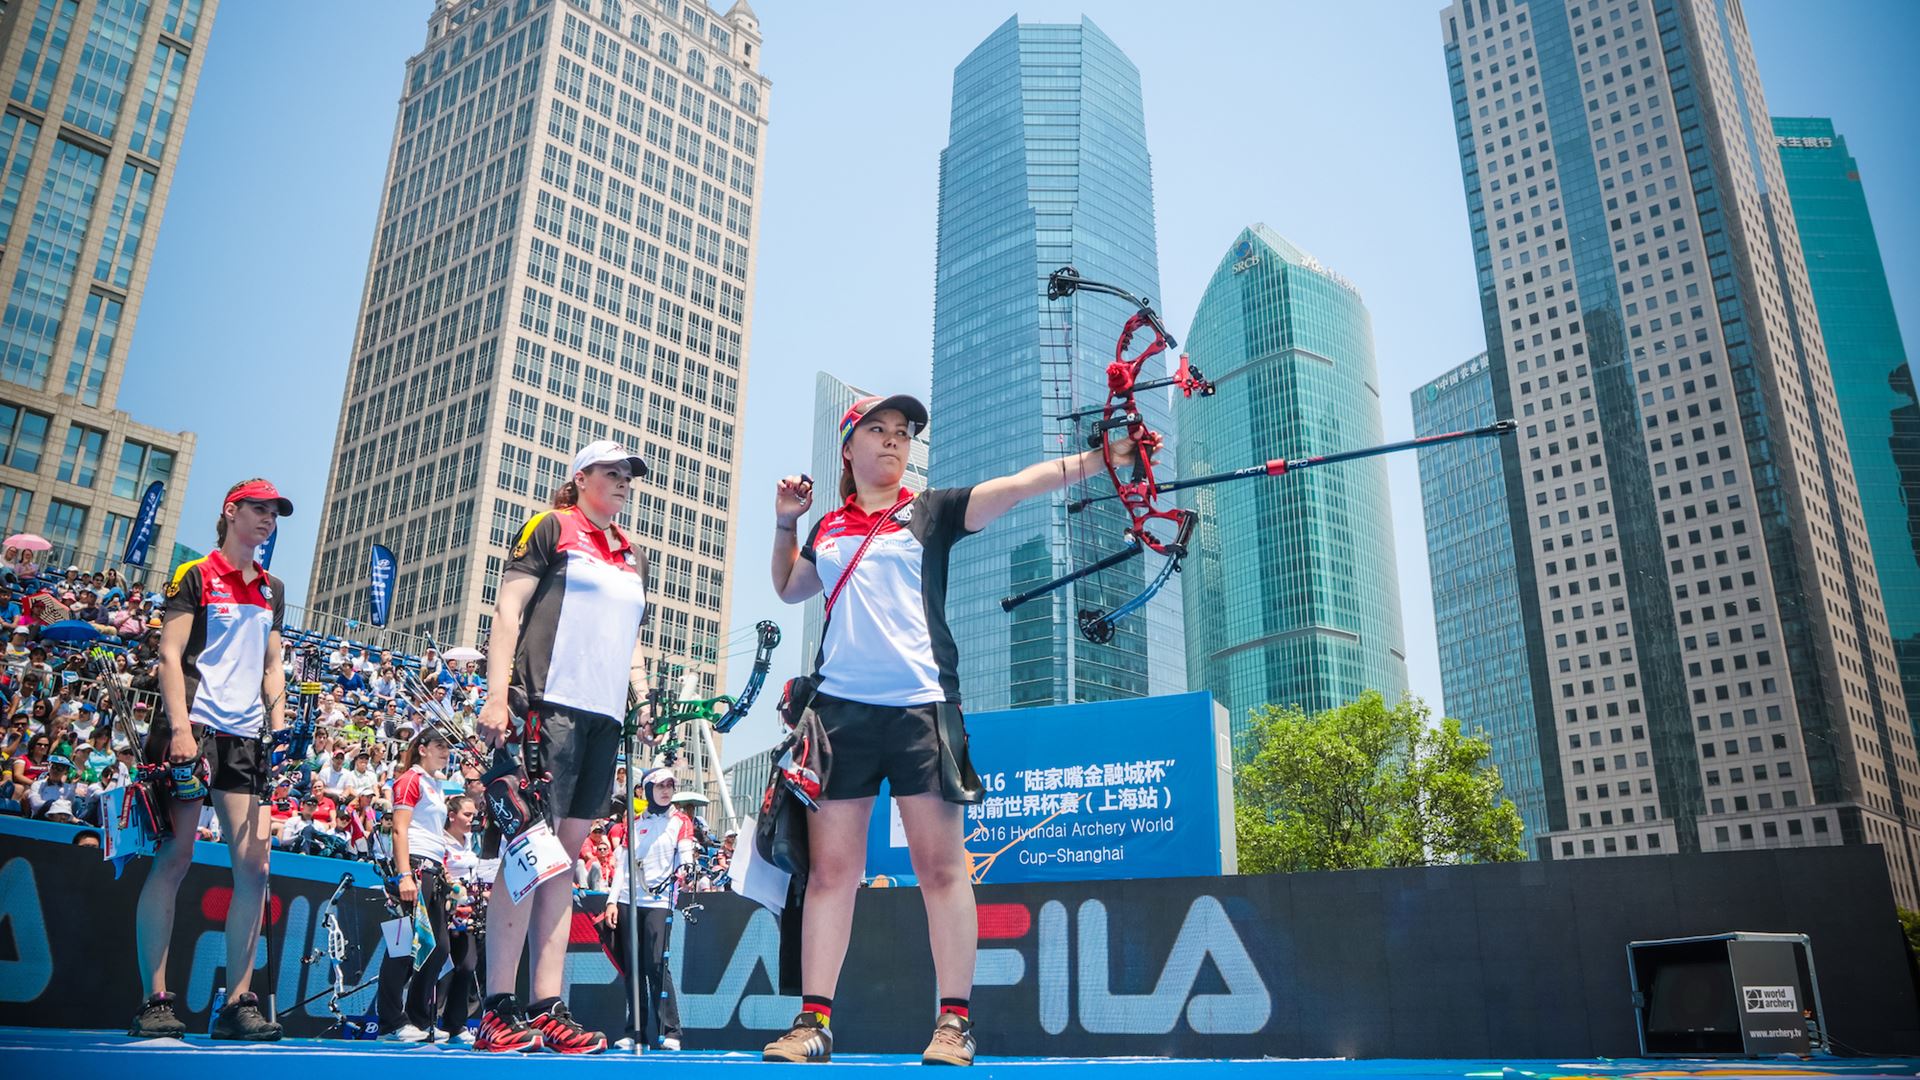 Athletes at the 2016 World Archery Championship in Shanghai